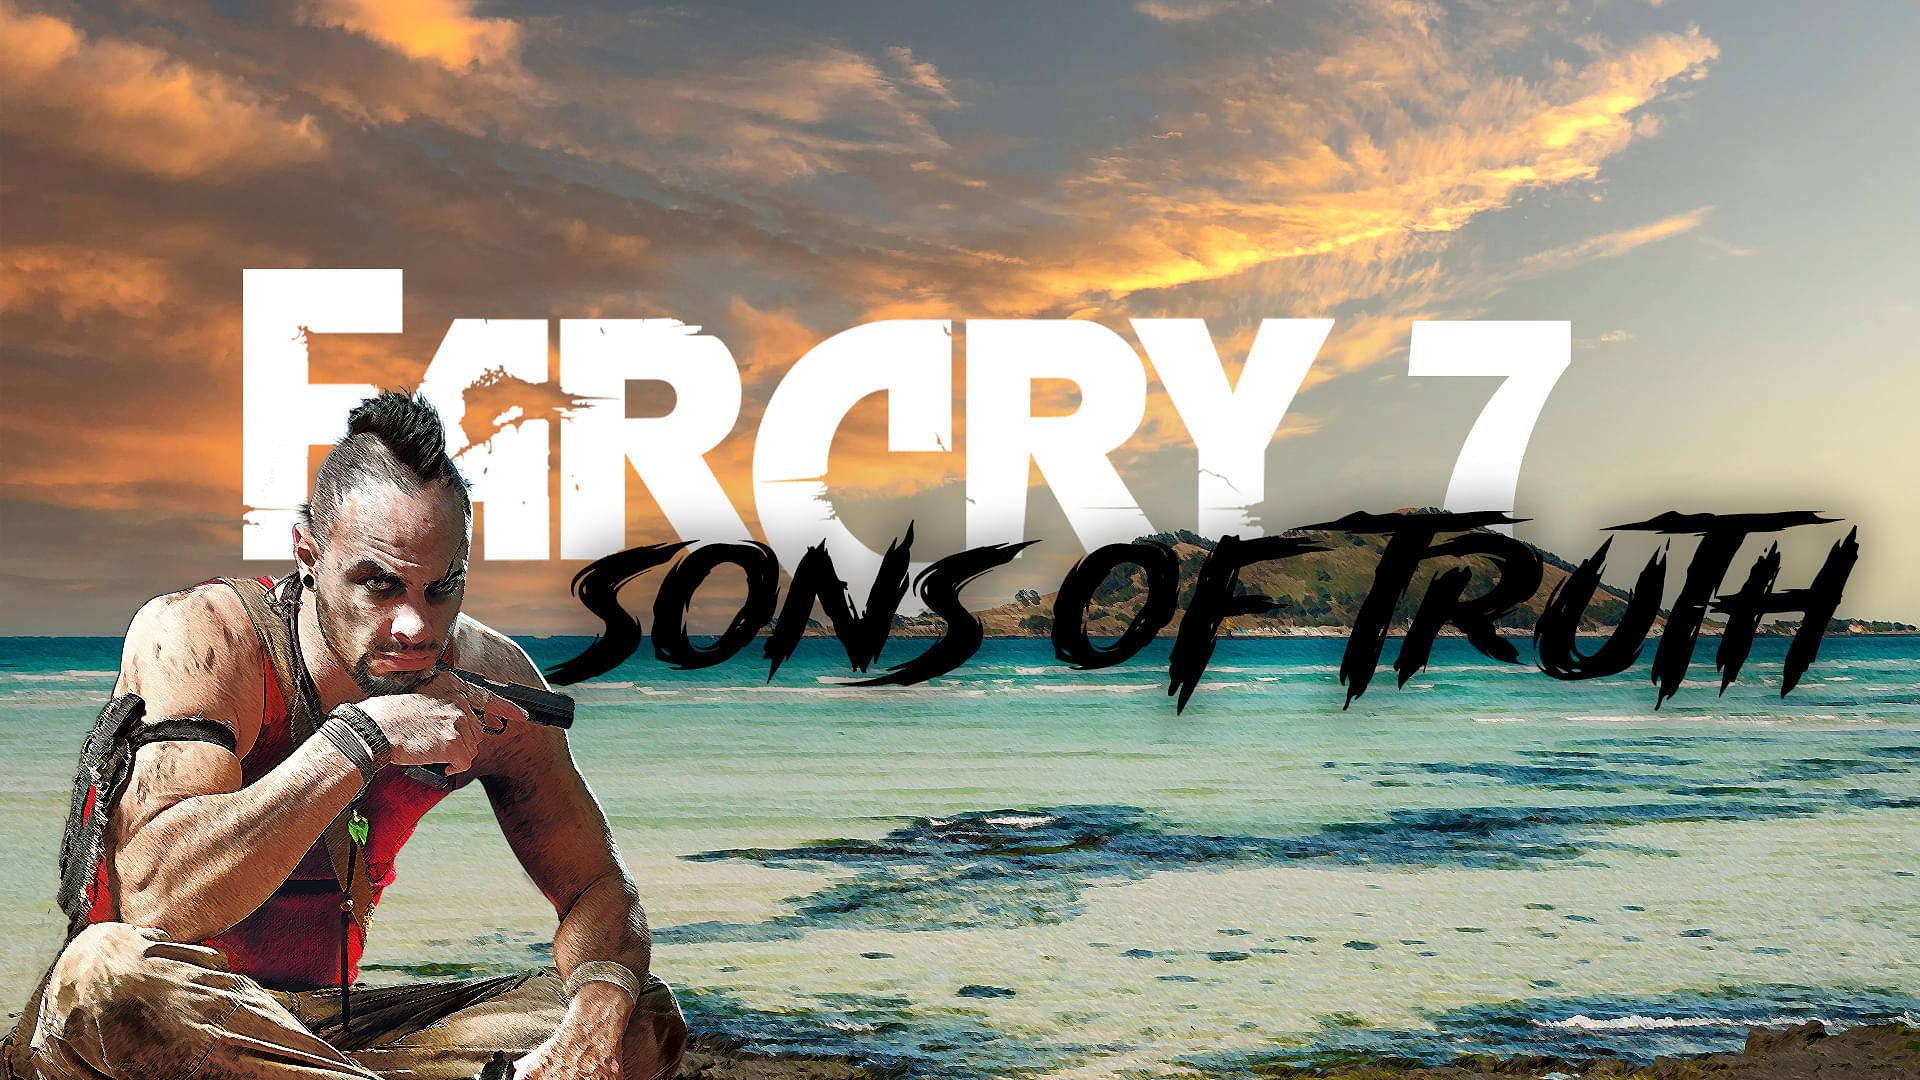 An image showing Vaas from FC3 with Far Cry 7 logo and a beach background